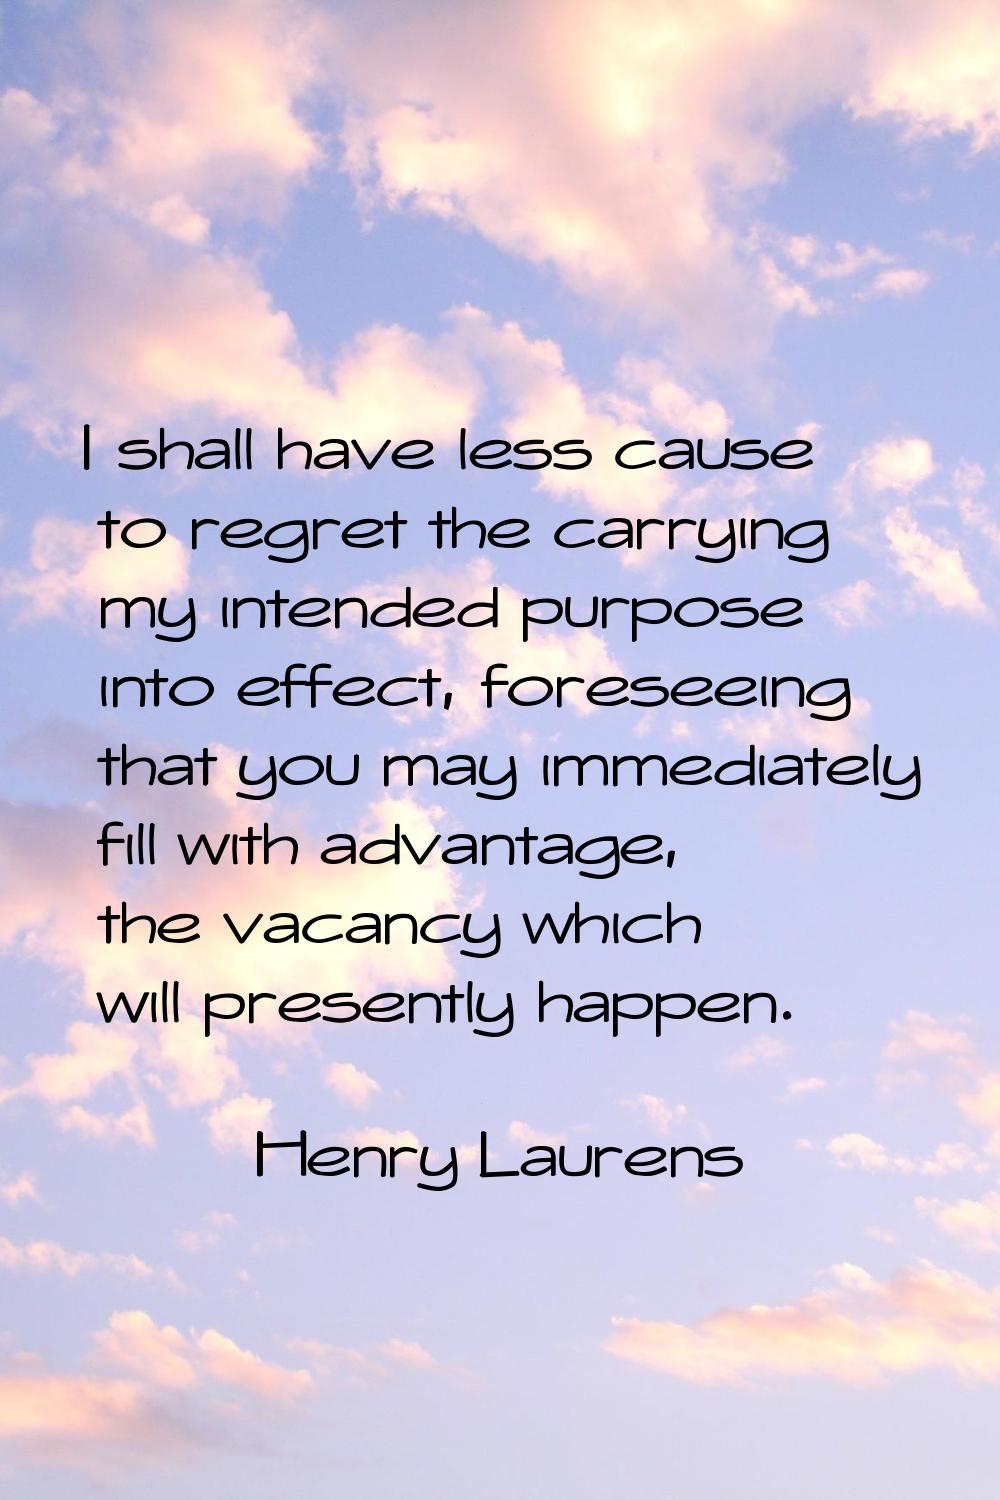 I shall have less cause to regret the carrying my intended purpose into effect, foreseeing that you